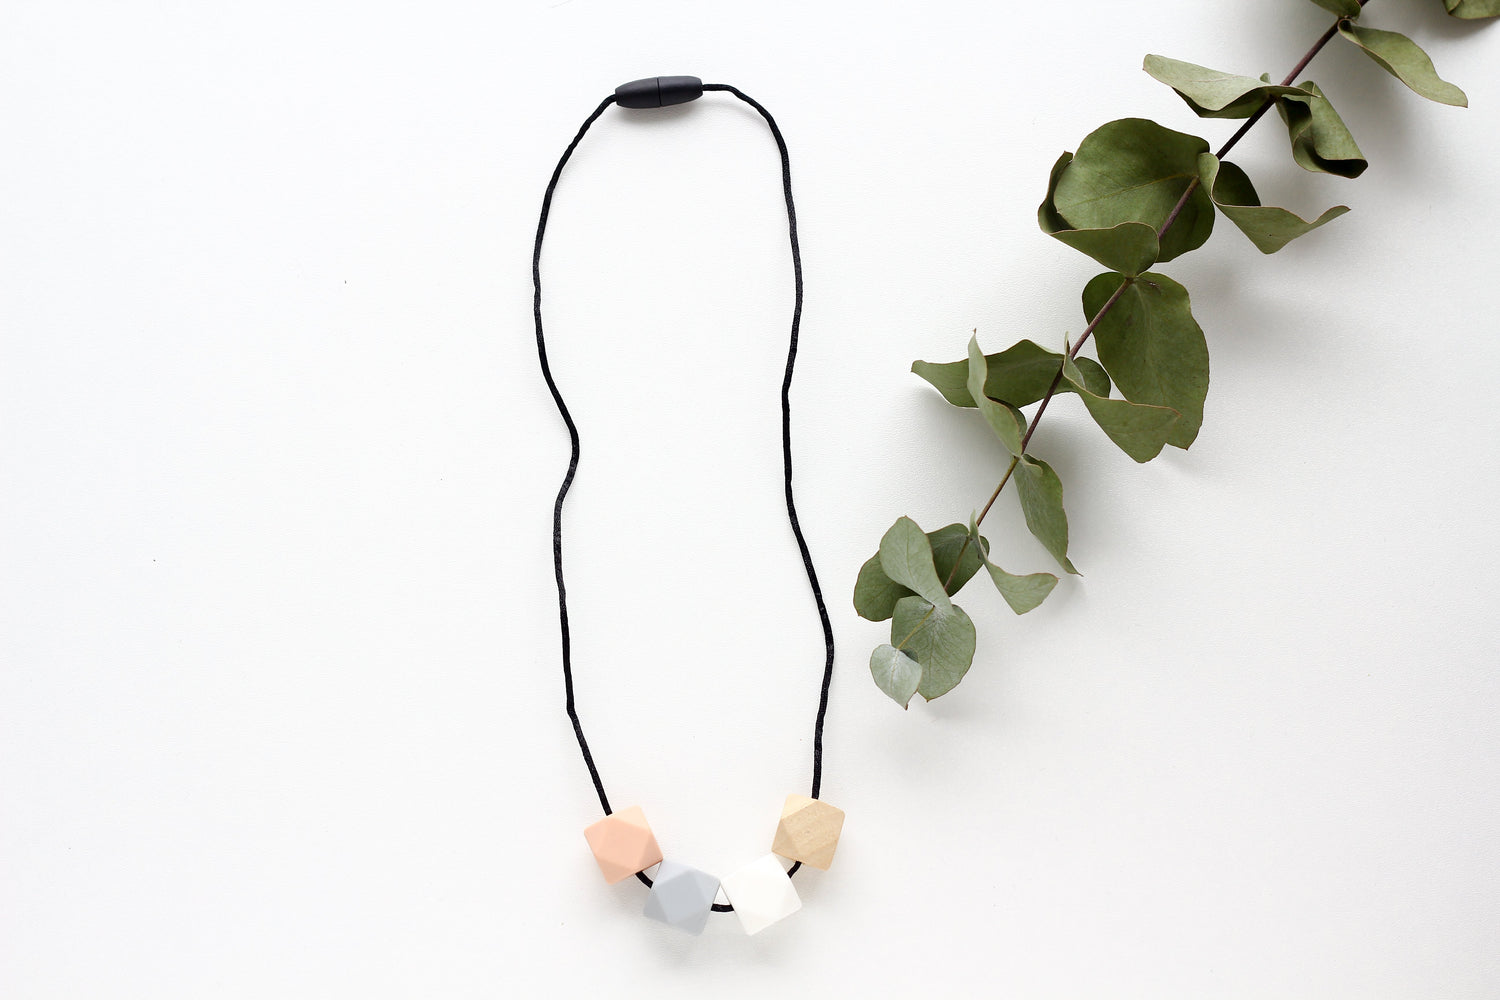 Peach - Nursing Necklace in non-toxic wood & silicone!.